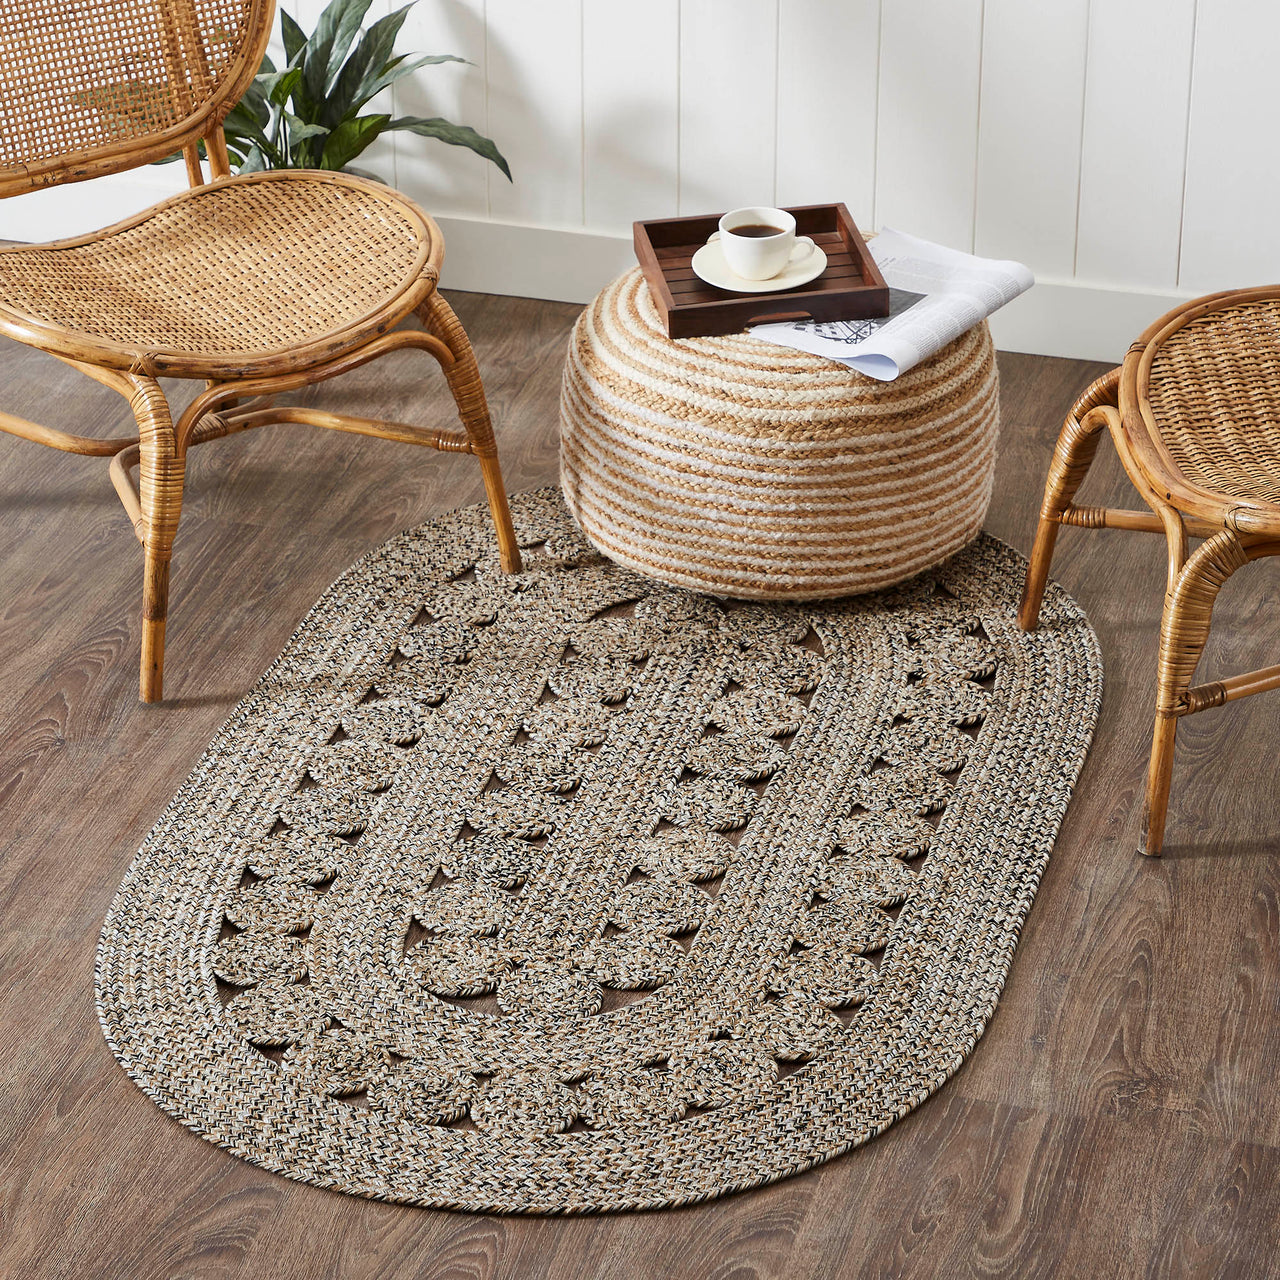 Celeste Blended Pebble Indoor/Outdoor Oval Braided Rug 36"'x60" (3'x5') VHC Brands